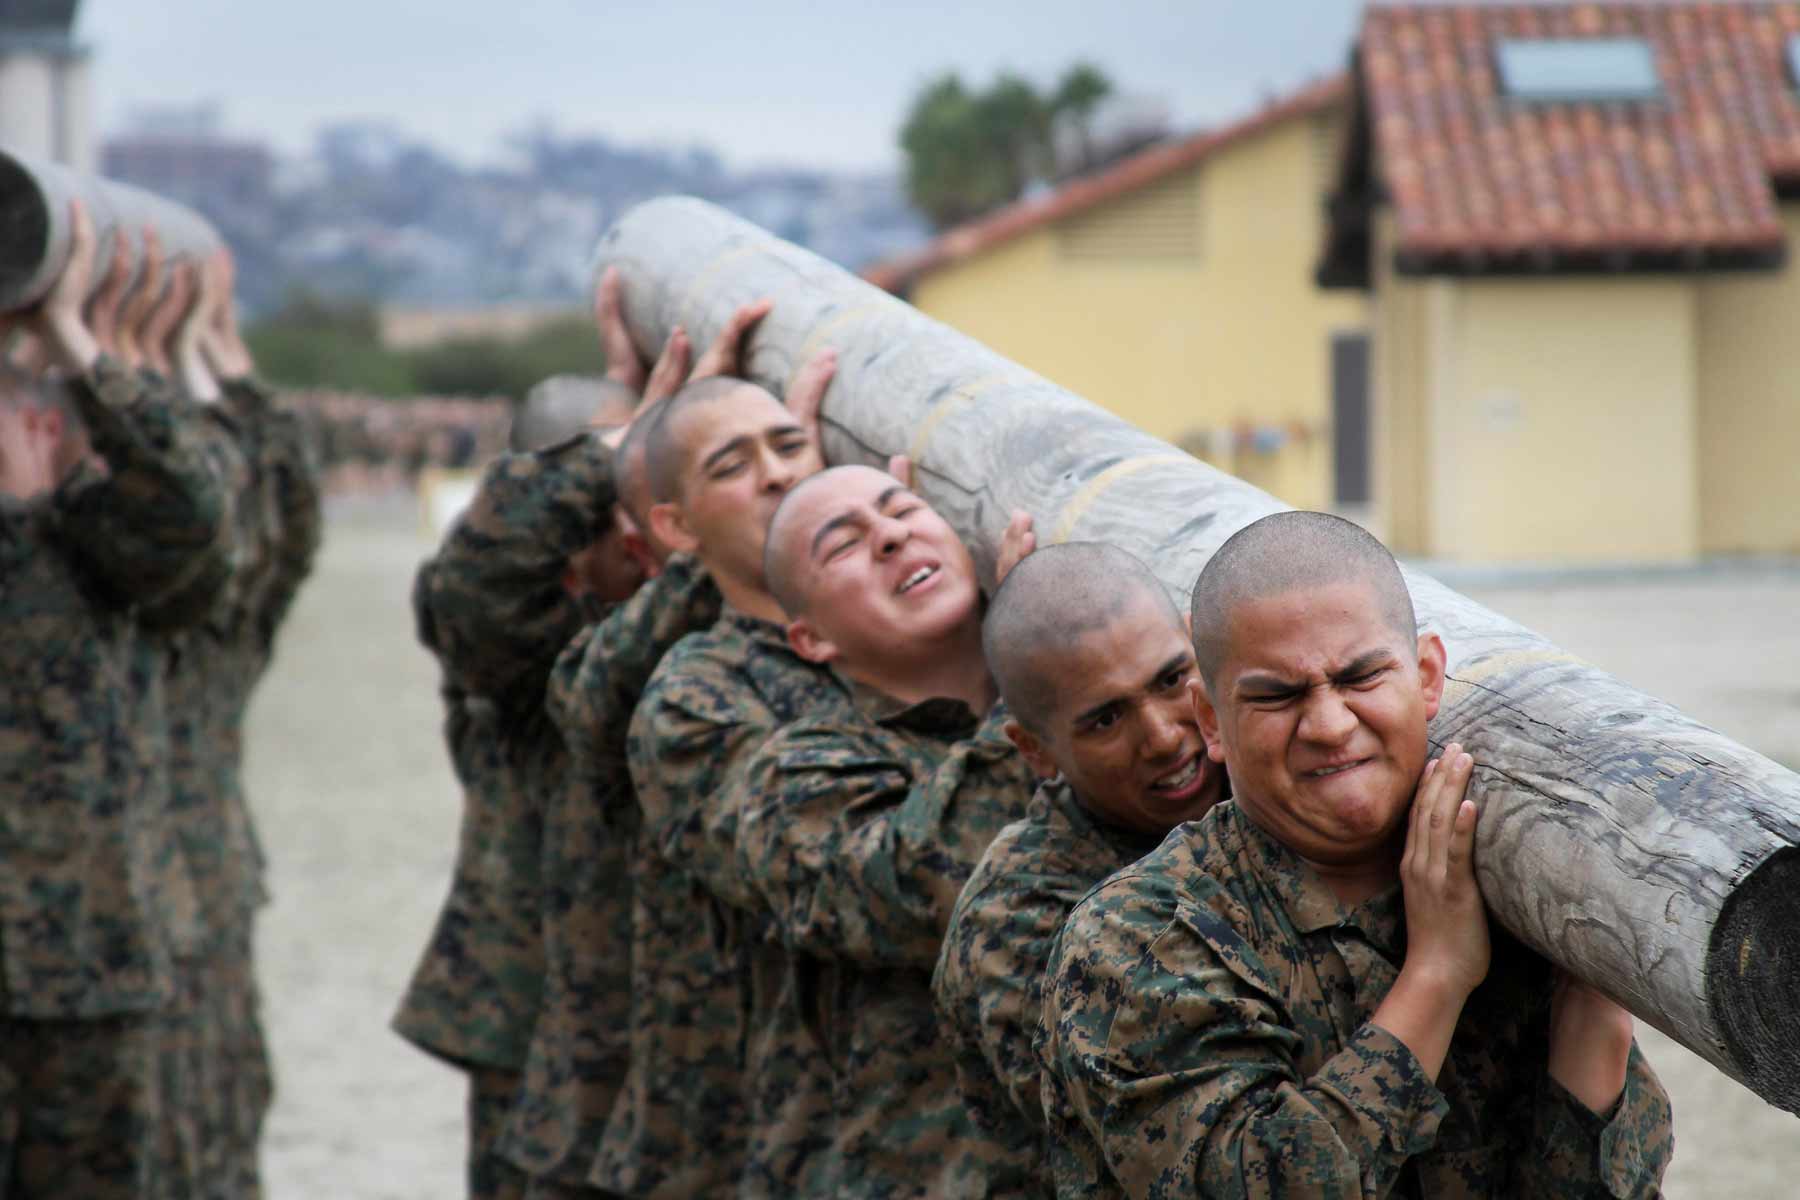 Marine Boot Camp Schedule 2022 Here's The Marine Corps' Plan To End Gender Segregation At Boot Camp |  Military.com